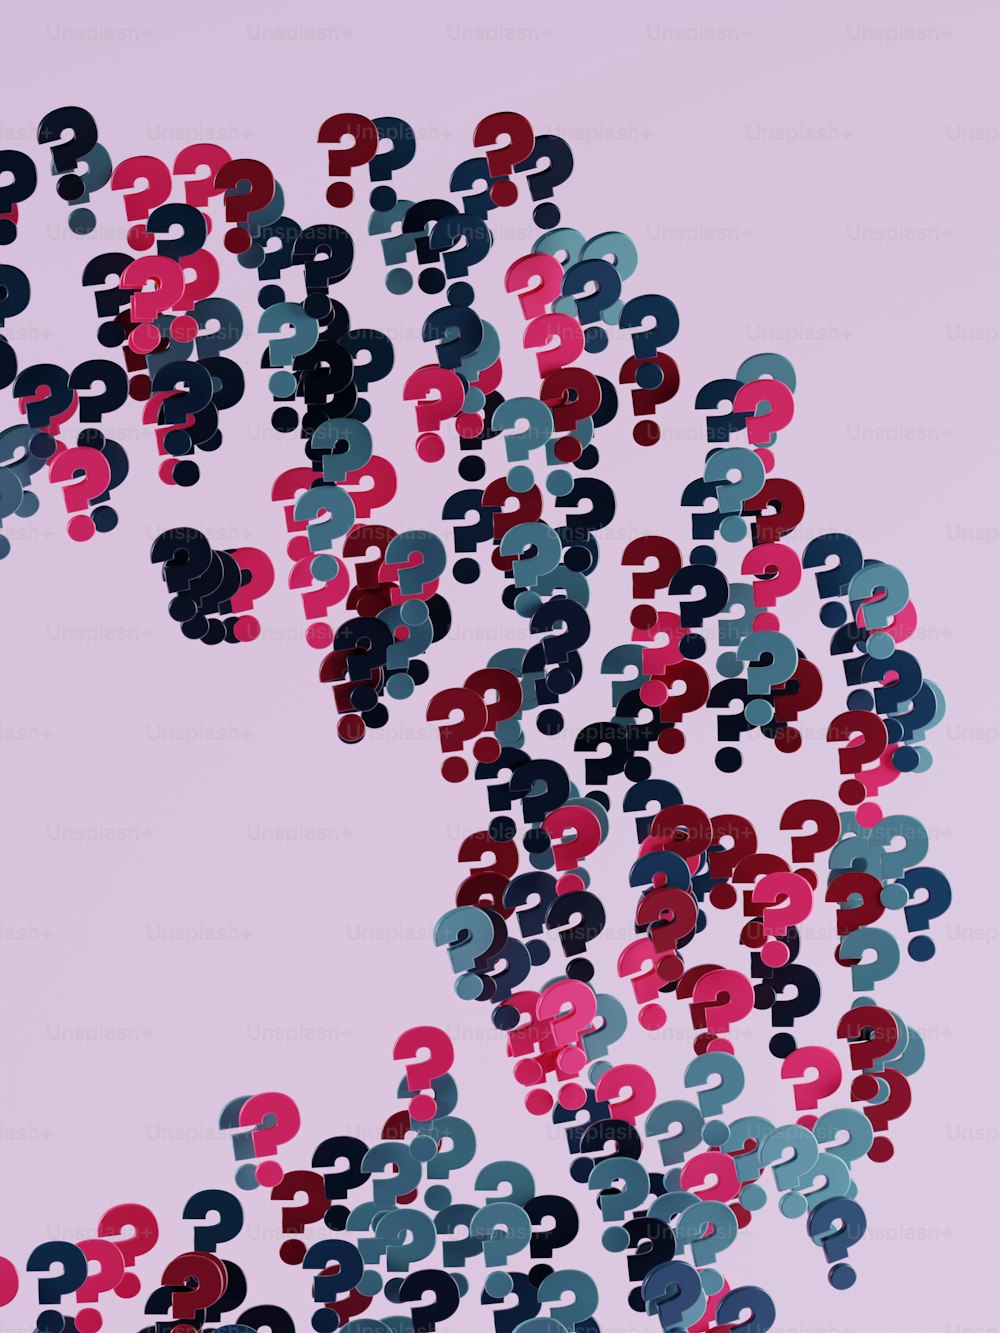 a large number of question marks on a pink background